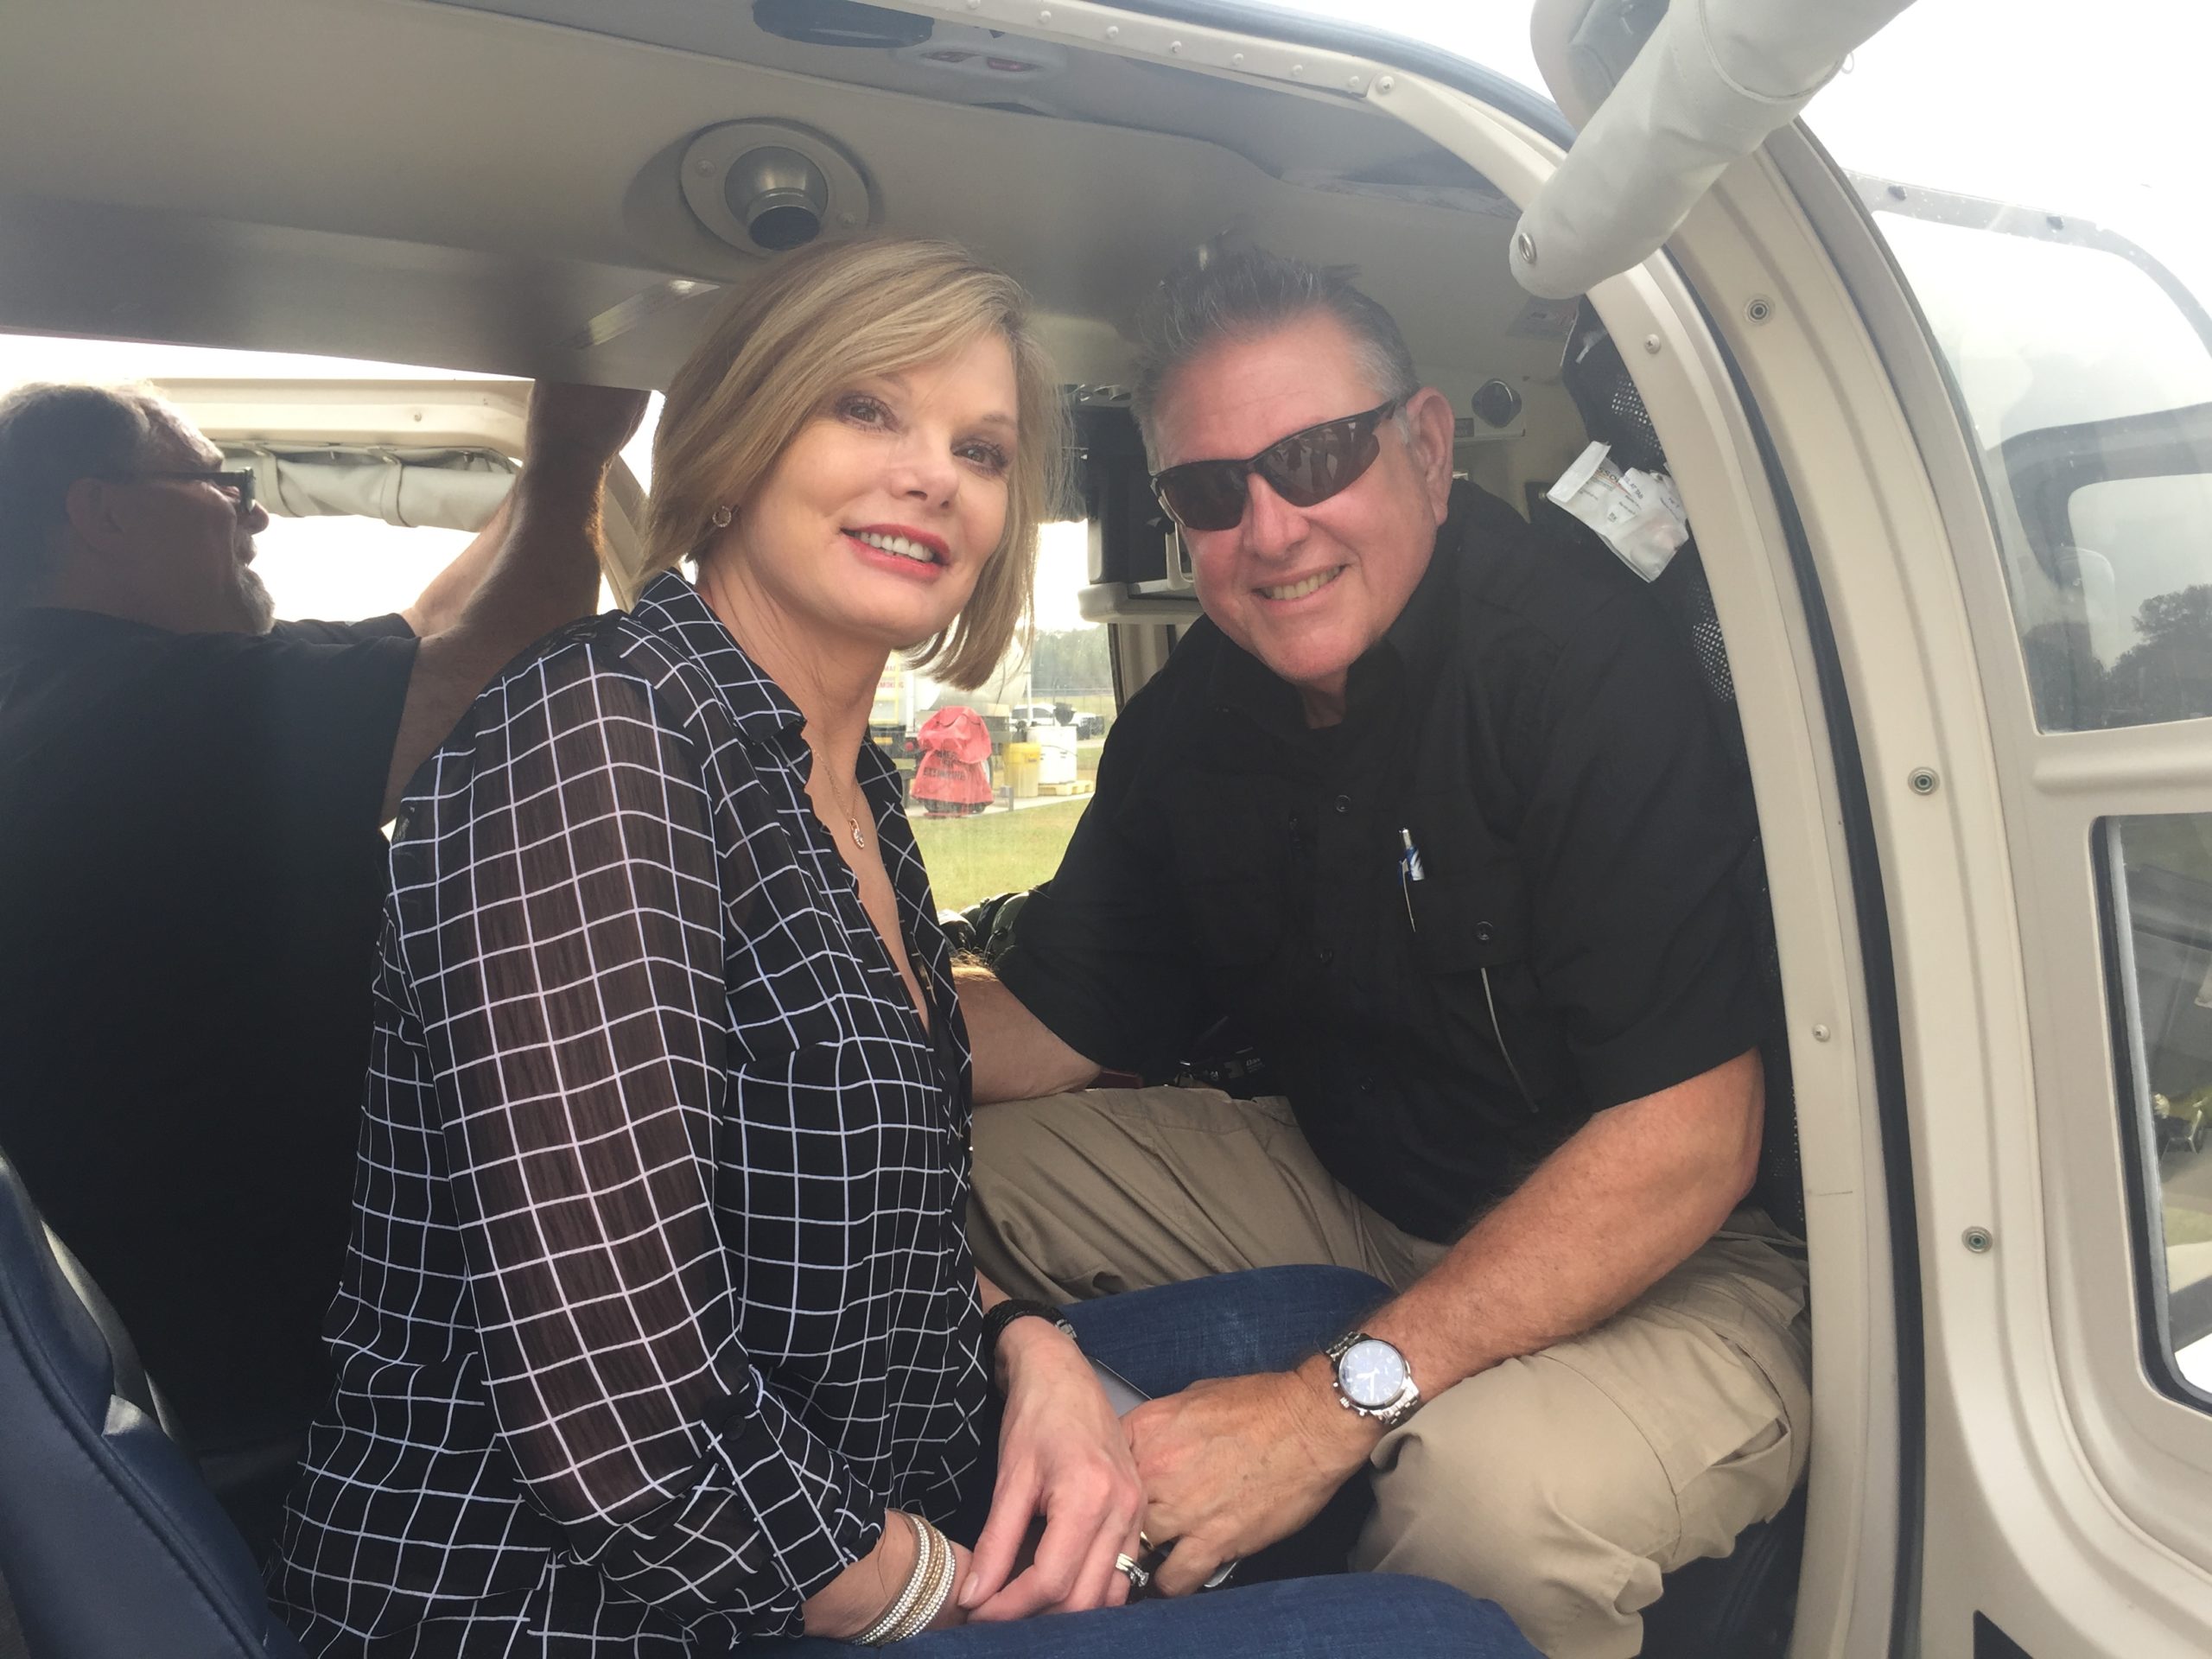 Karen Espinosa and husband in helicopter